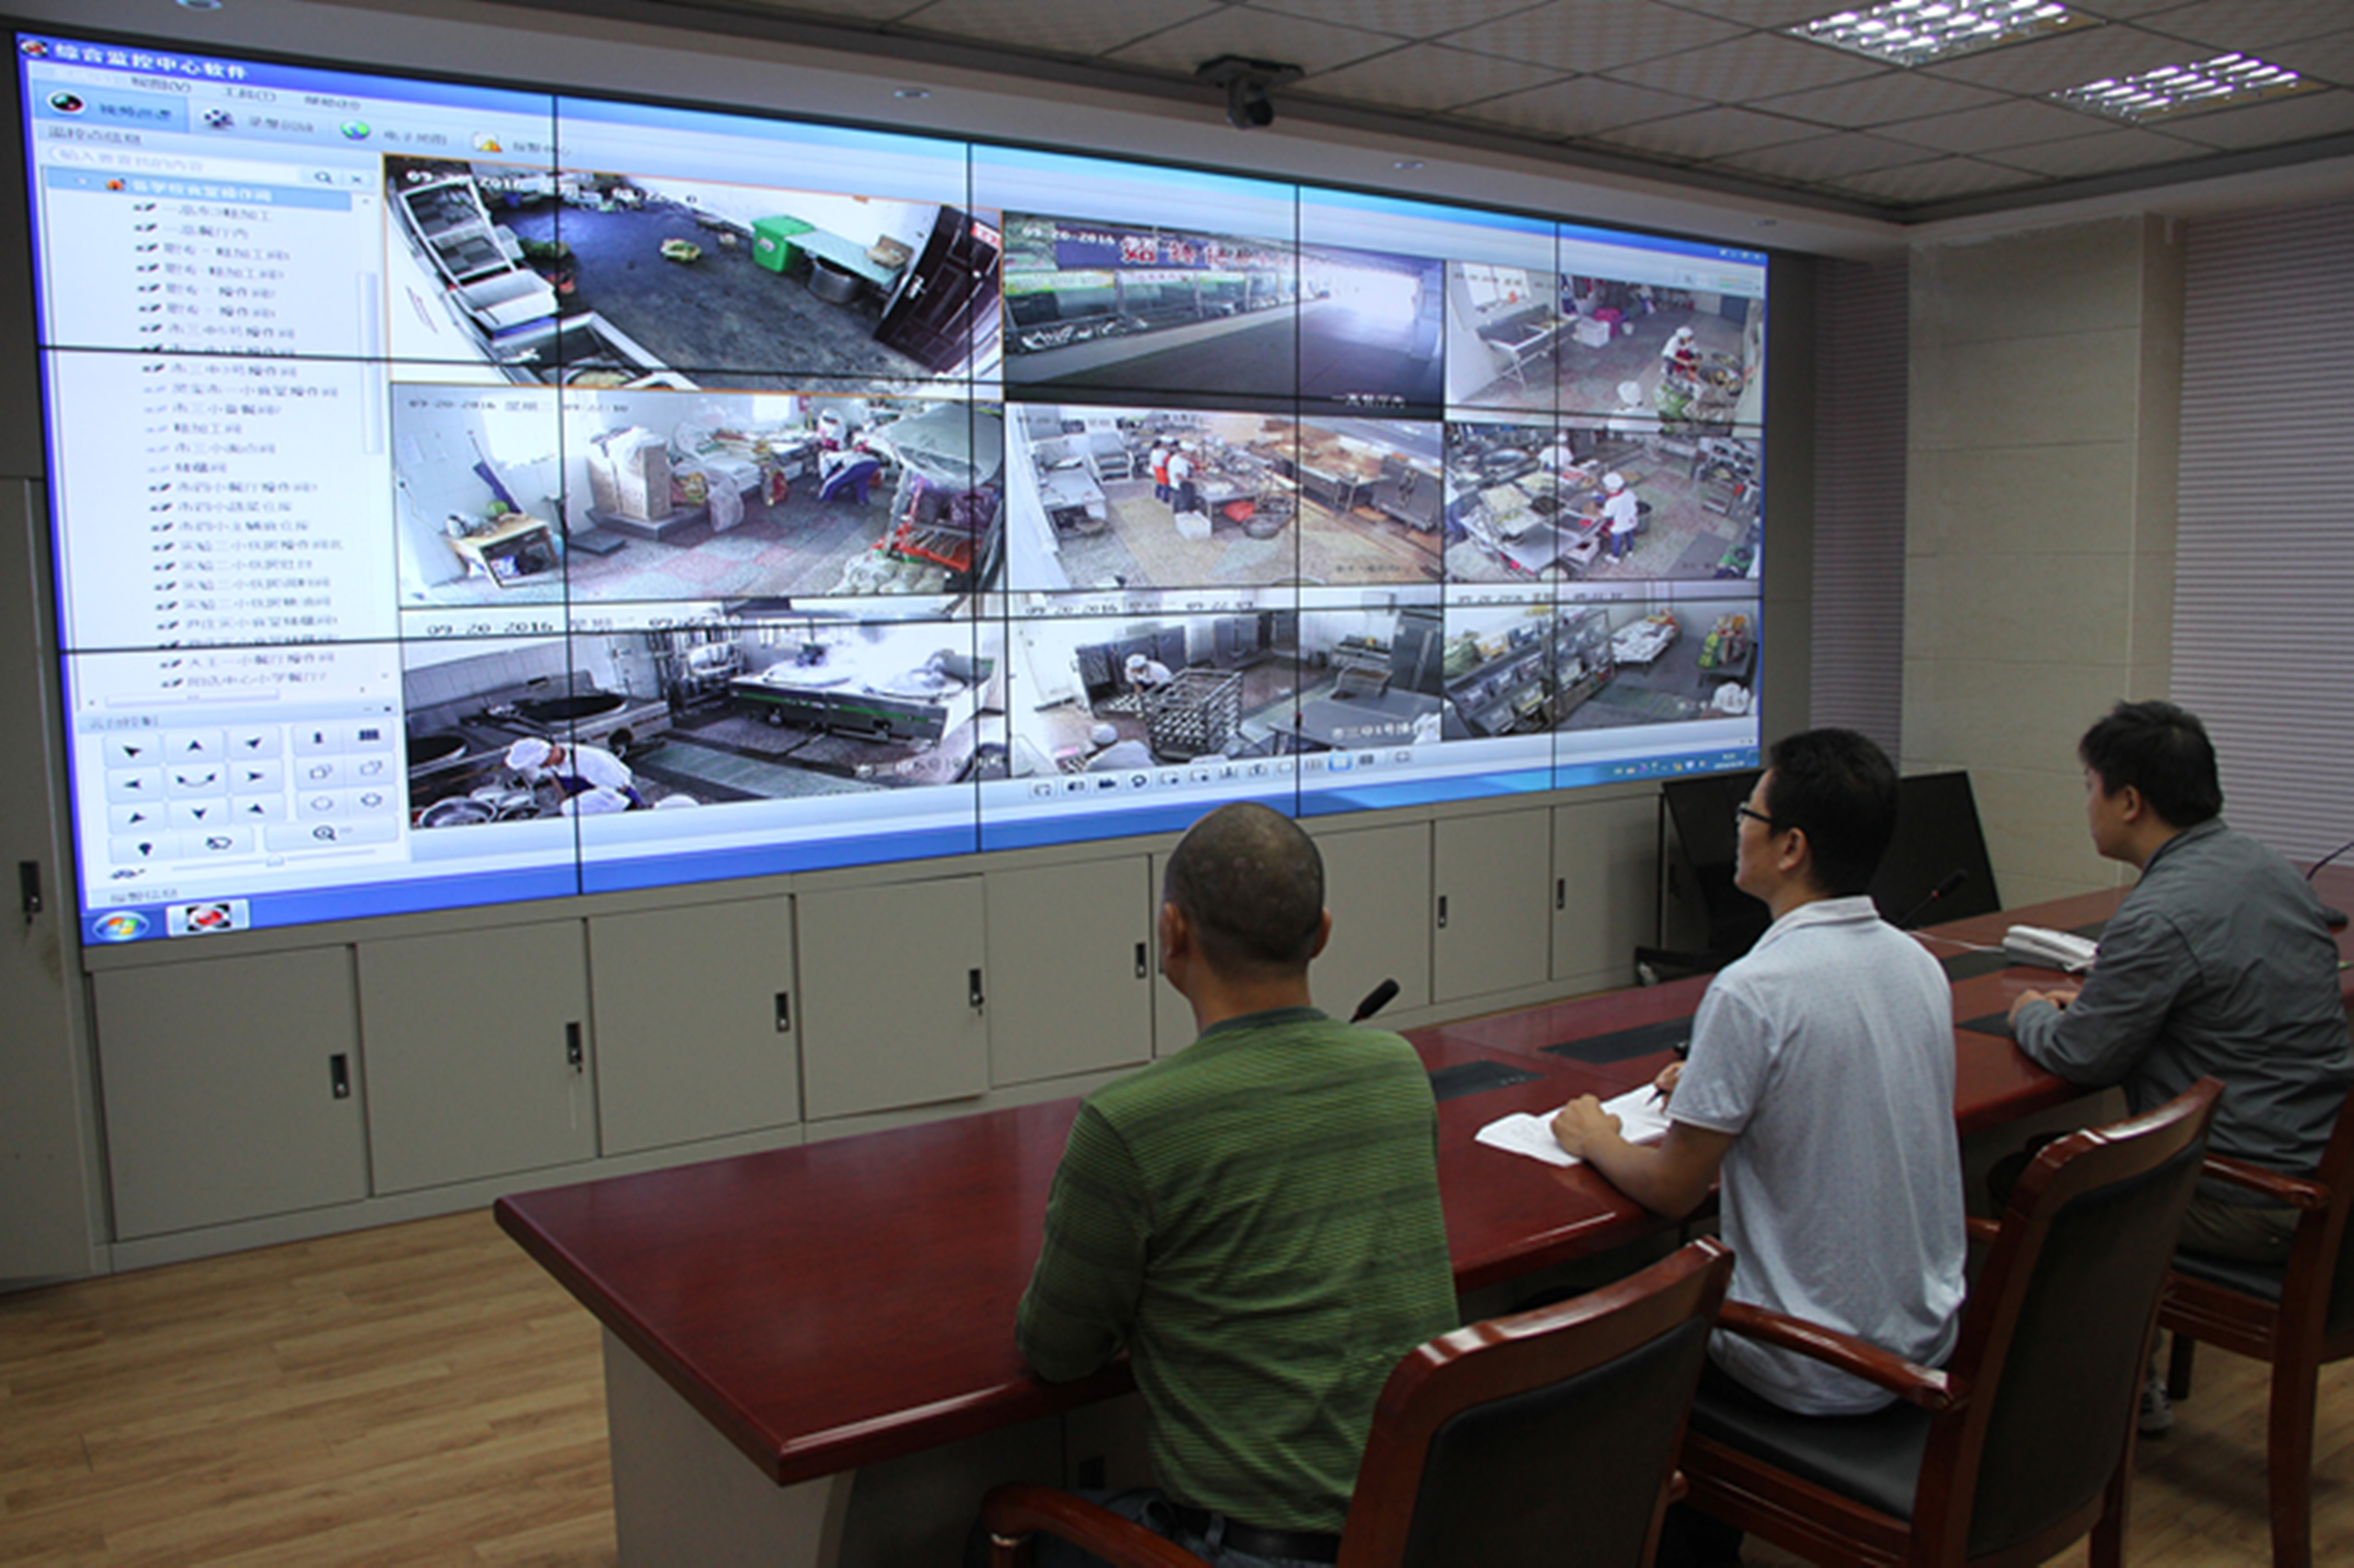 Frequently asked questions about video surveillance technology